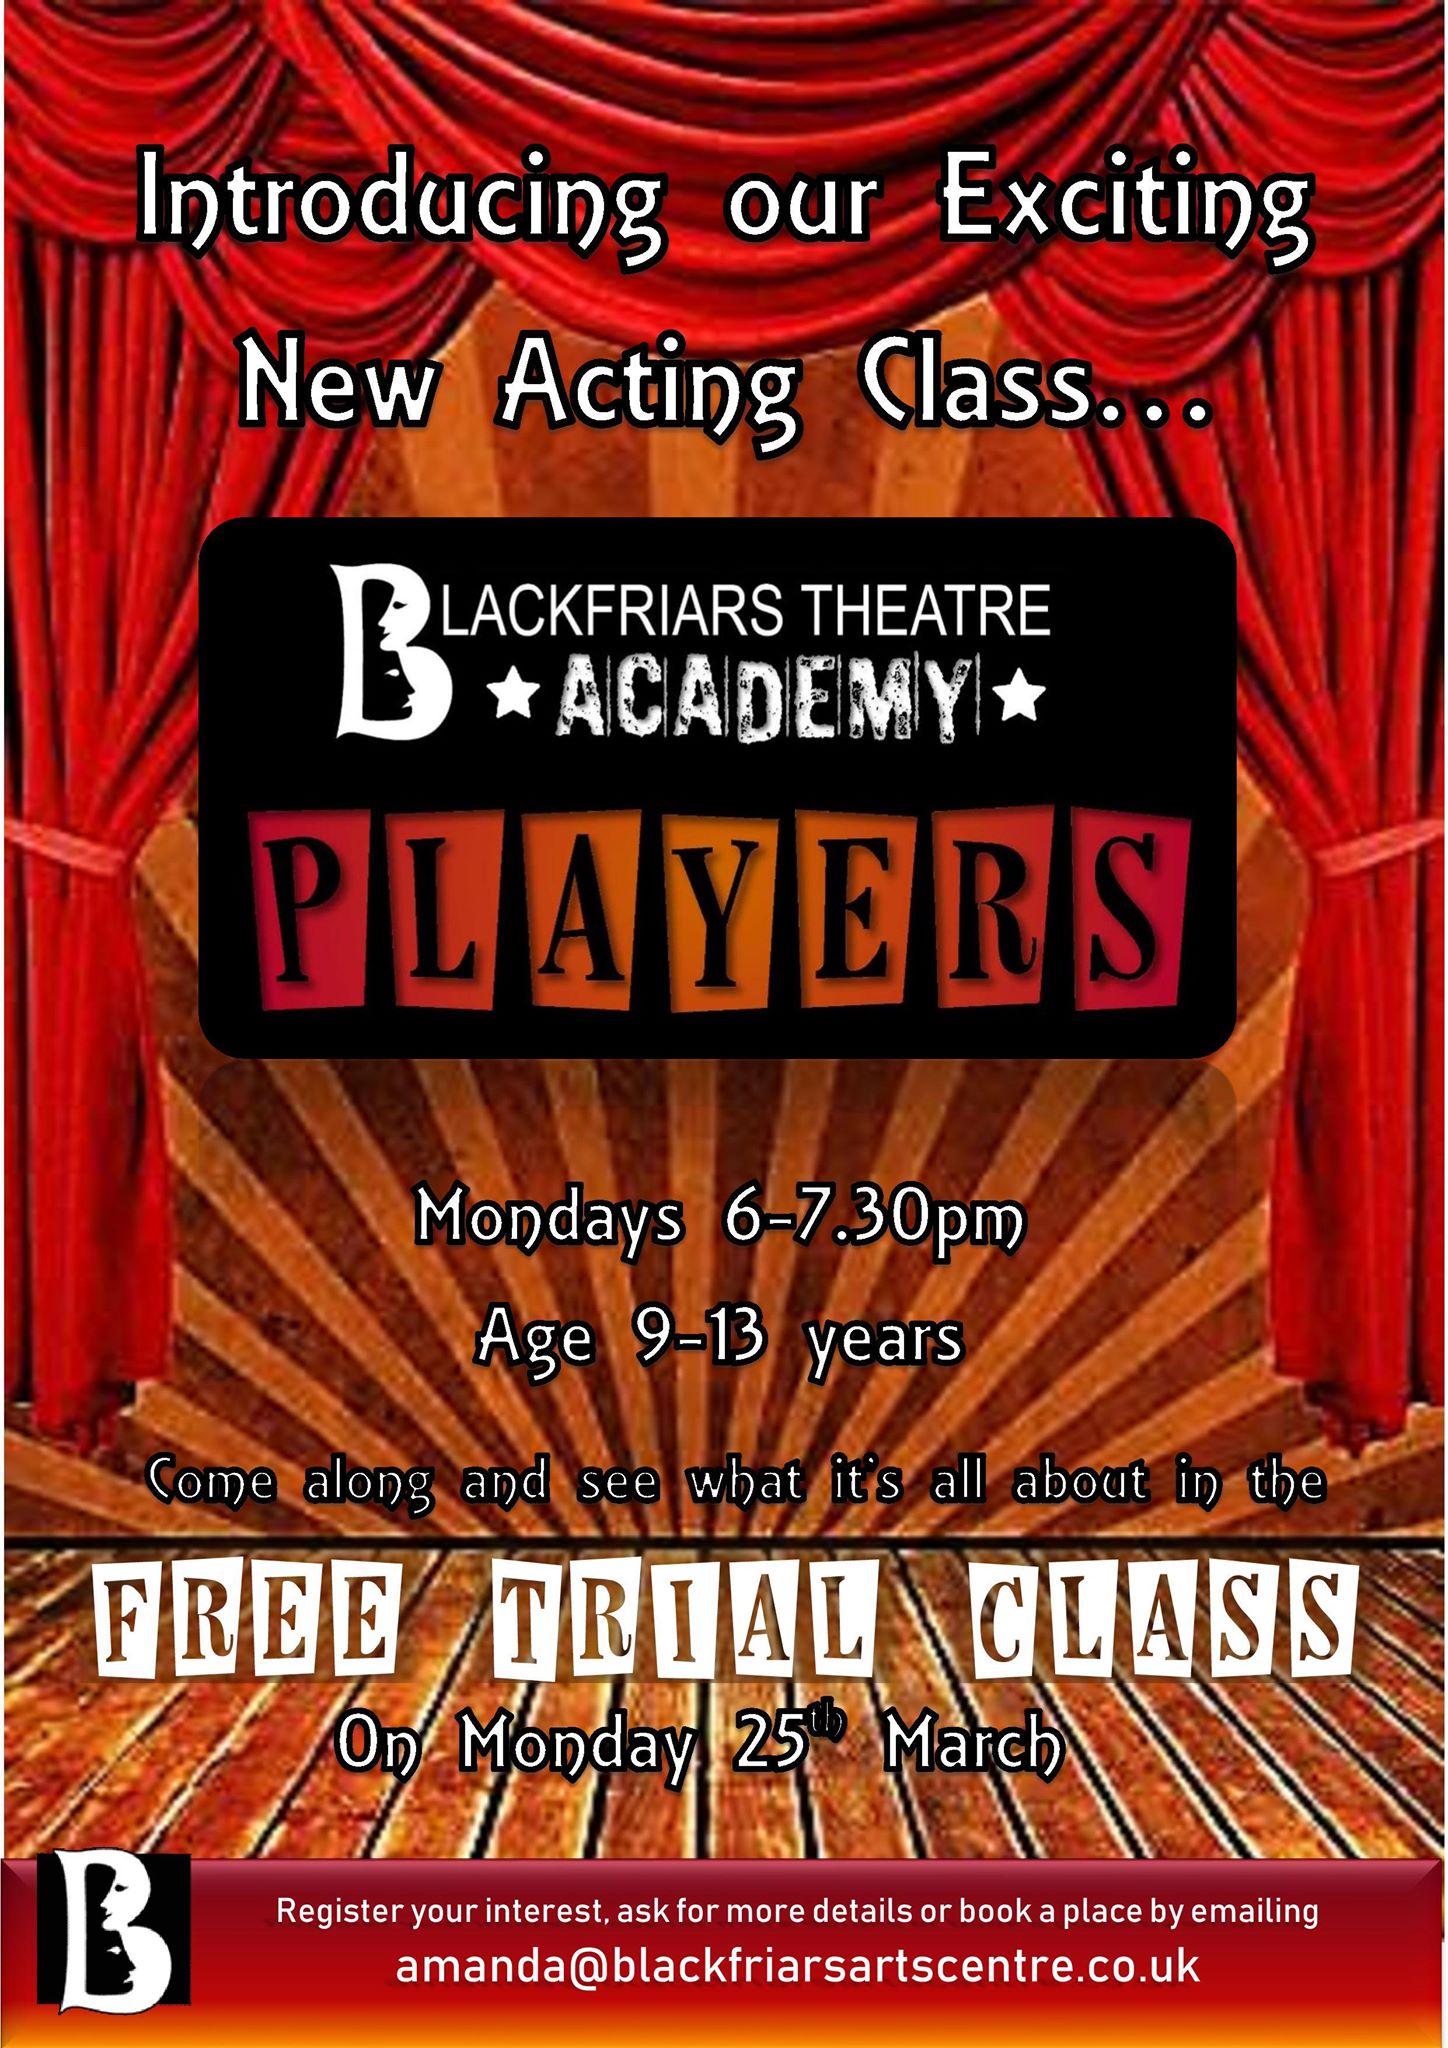 New acting class for Blackfriars Theatre Academy!